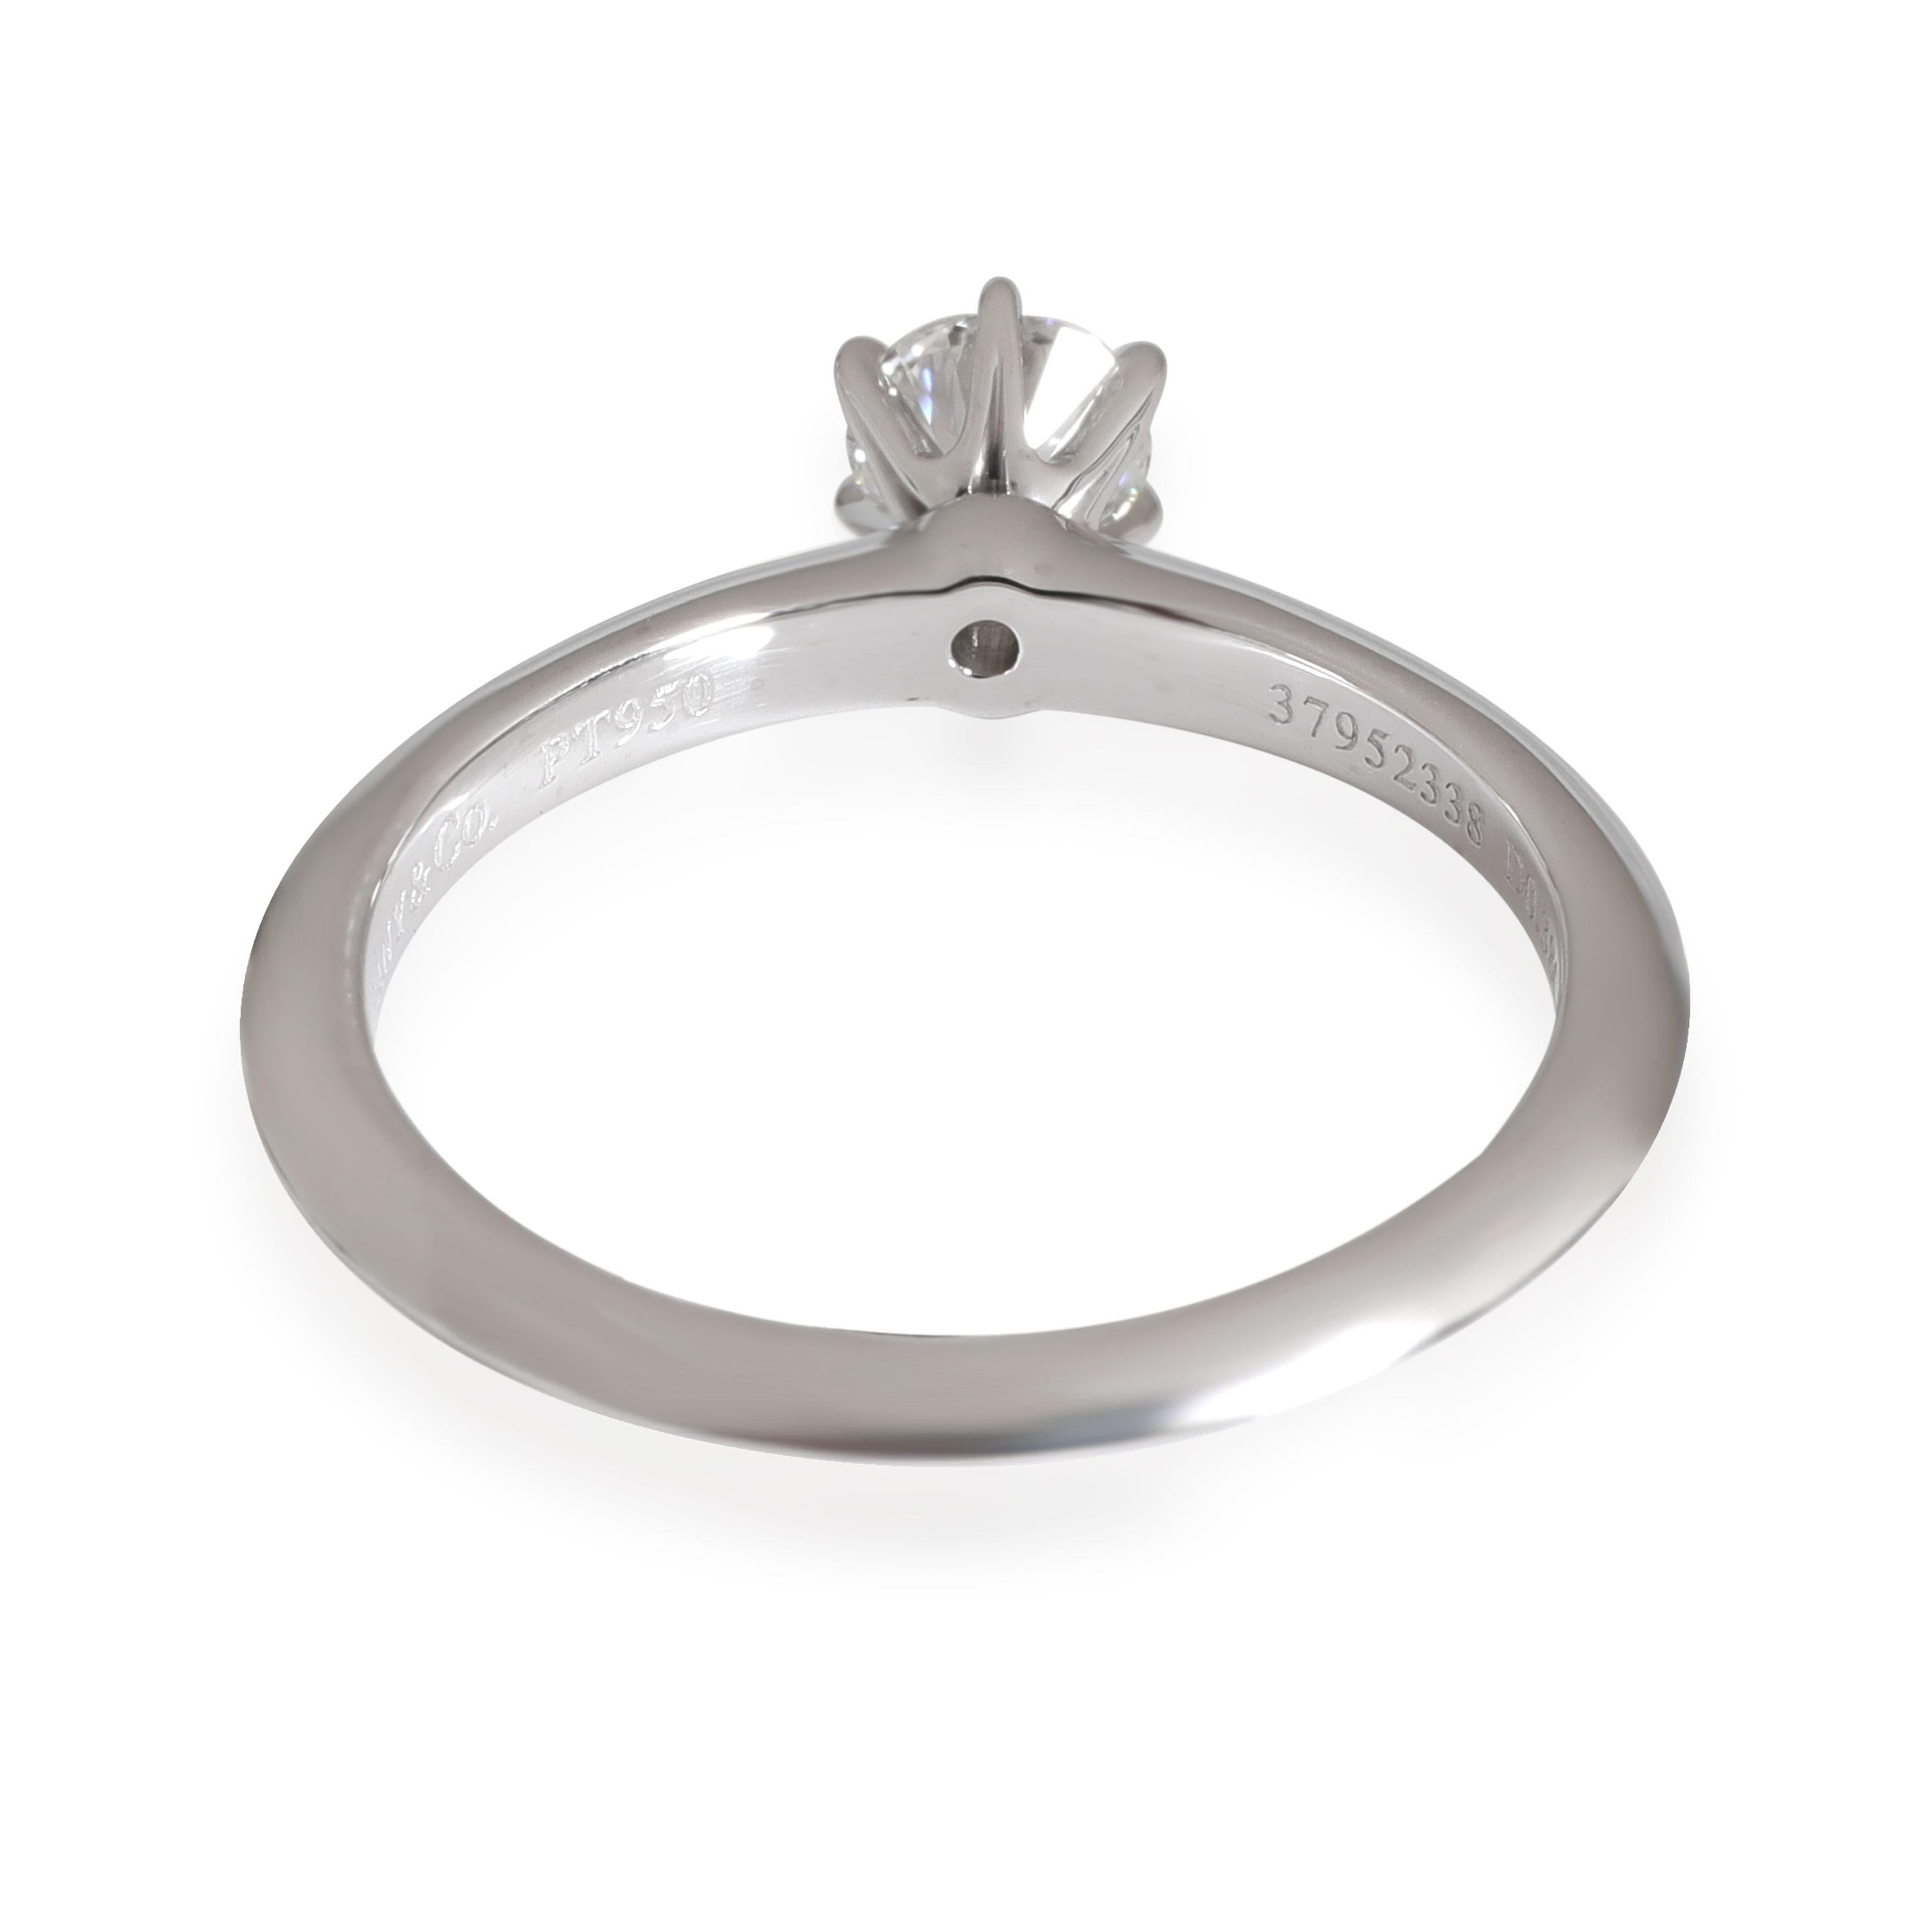 Tiffany & Co. Diamond Engagement Ring in Platinum F VVS2 0.38 CTW

PRIMARY DETAILS
SKU: 116616
Listing Title: Tiffany & Co. Diamond Engagement Ring in Platinum F VVS2 0.38 CTW
Condition Description: Retails for 4855 USD. In excellent condition and